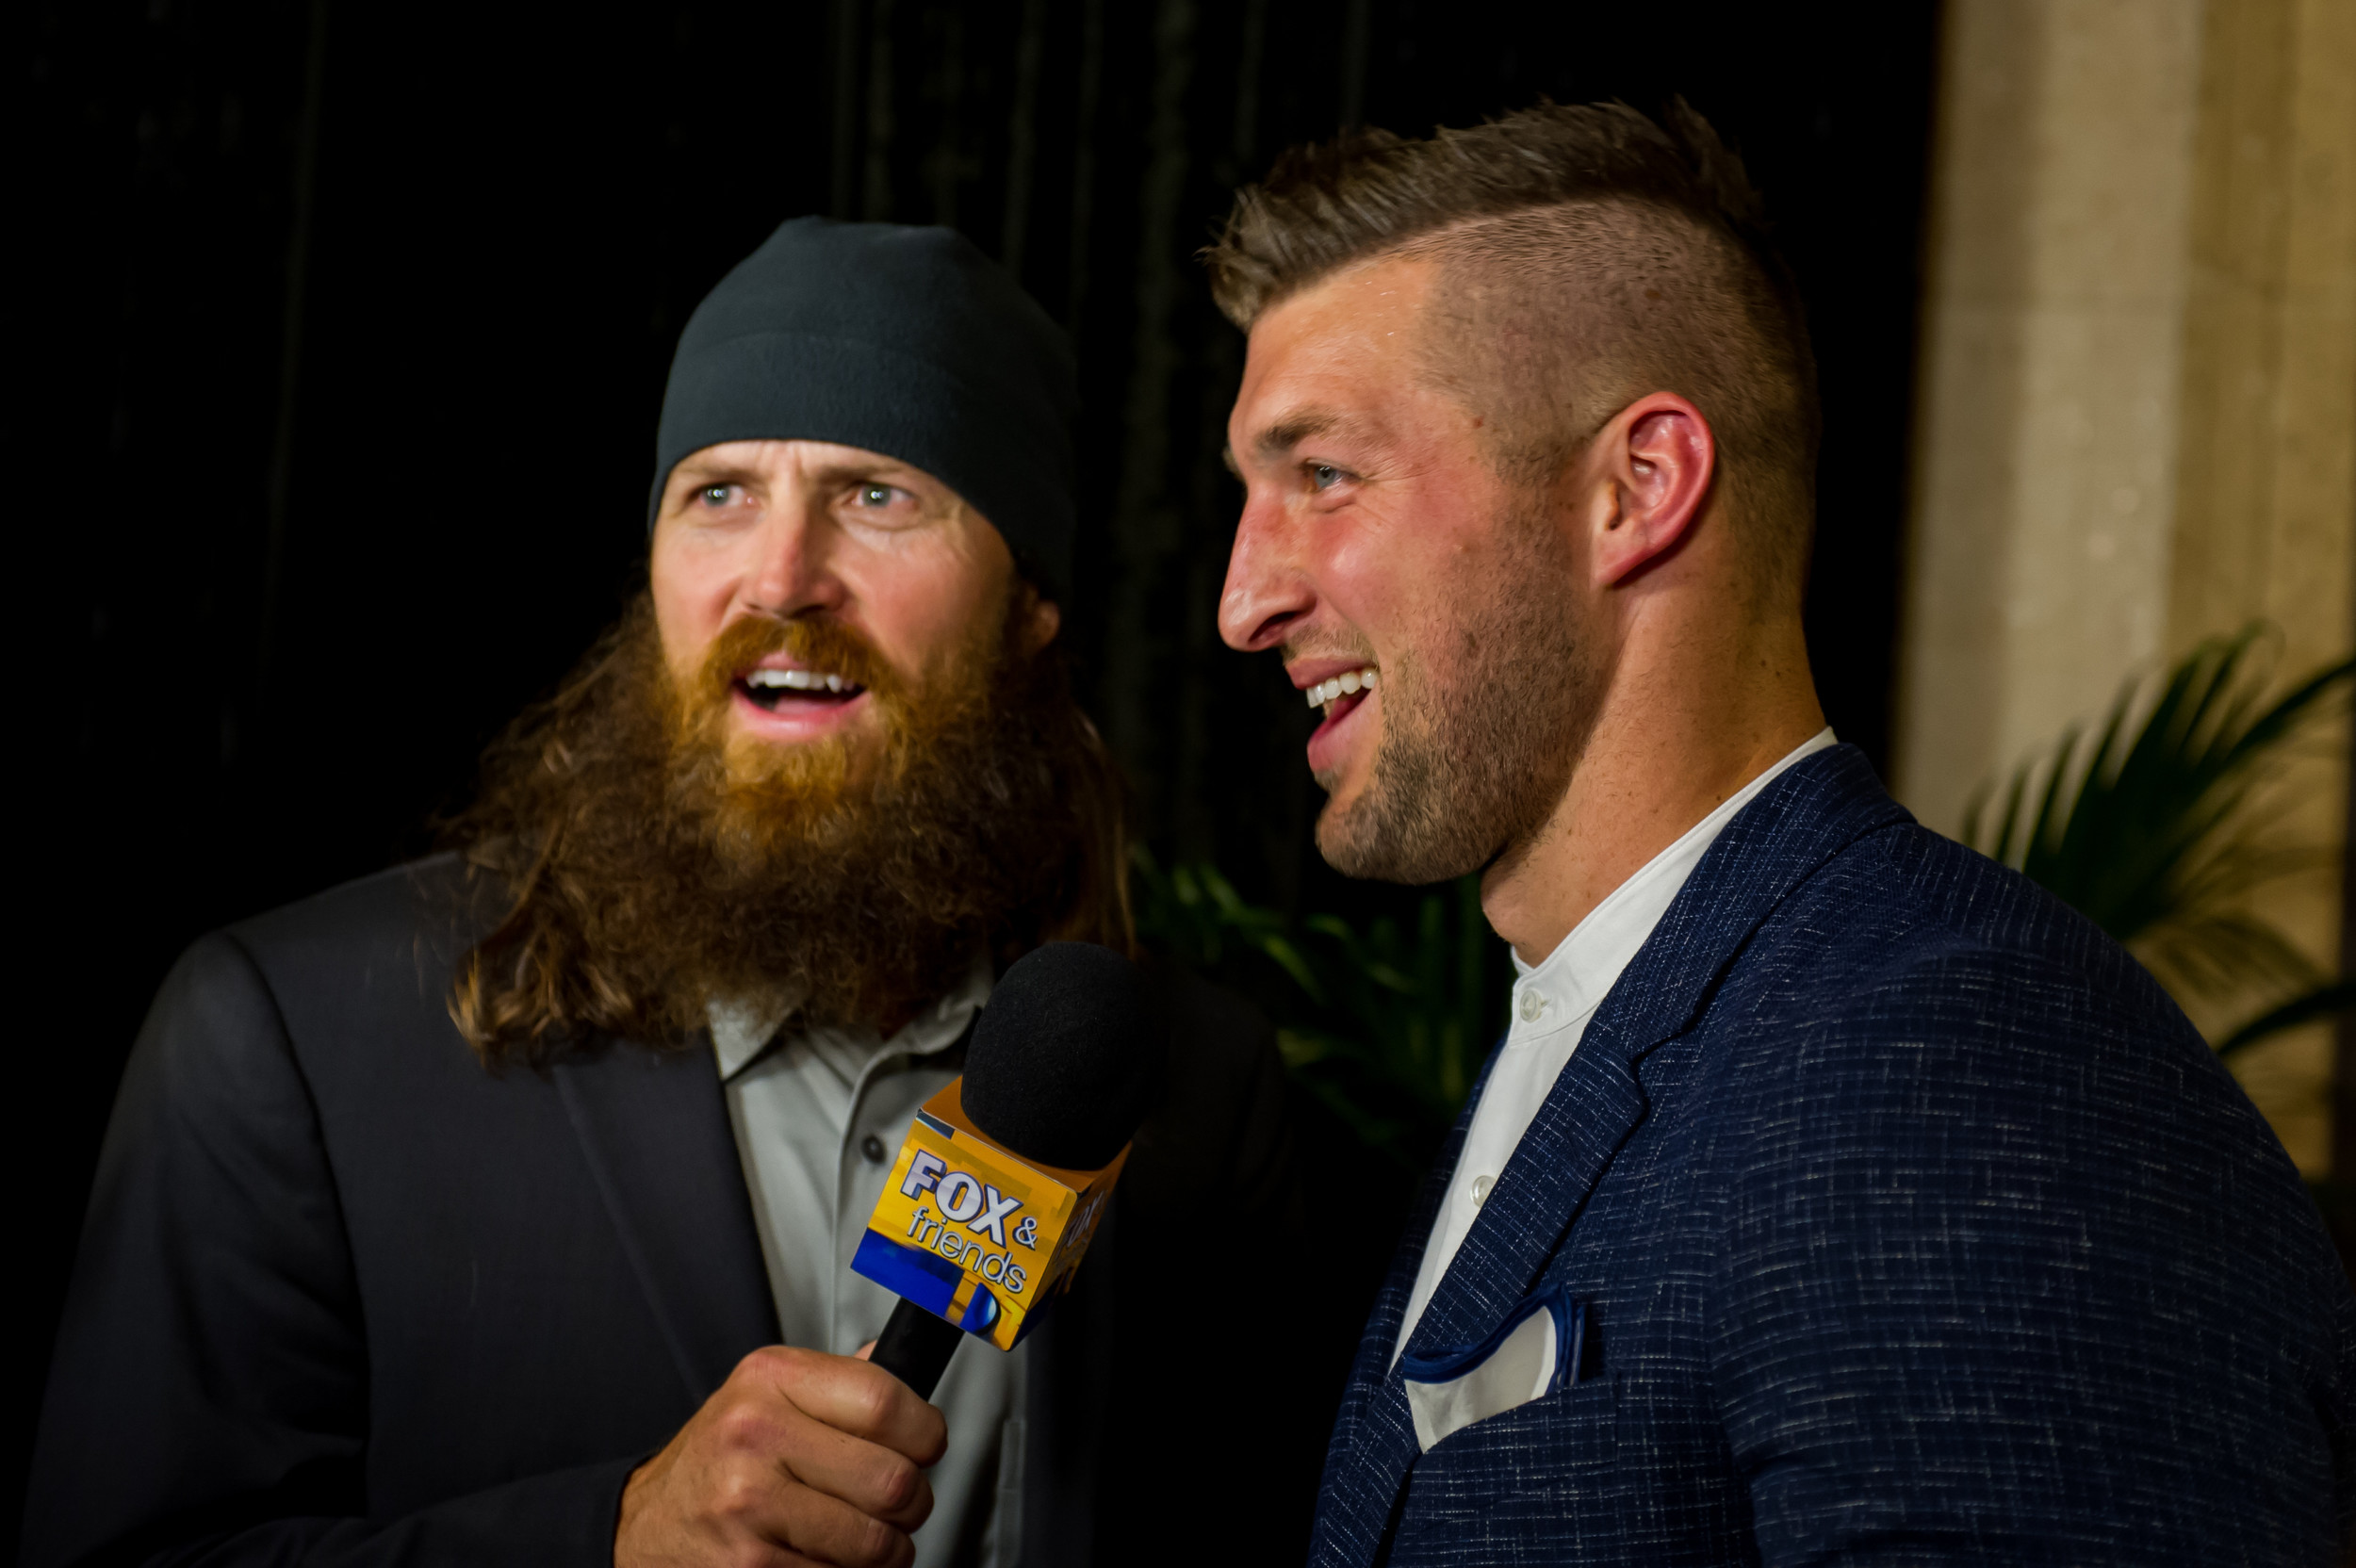 Duck Dynasty’s Jase Robertson interviewed Tim Tebow on Friday night at the Tim Tebow Foundation Annual Charitable Gala and 6th Celebrity Golf Classic, hosted at TPC Sawgrass. The Friday night gala raised money to help fund the foundation’s seven areas of outreach. The next day, celebrities took to the course for a golf classic. The Tim Tebow foundation aims to bring faith, hope and love to make dreams come true for children with life-threatening illnesses.